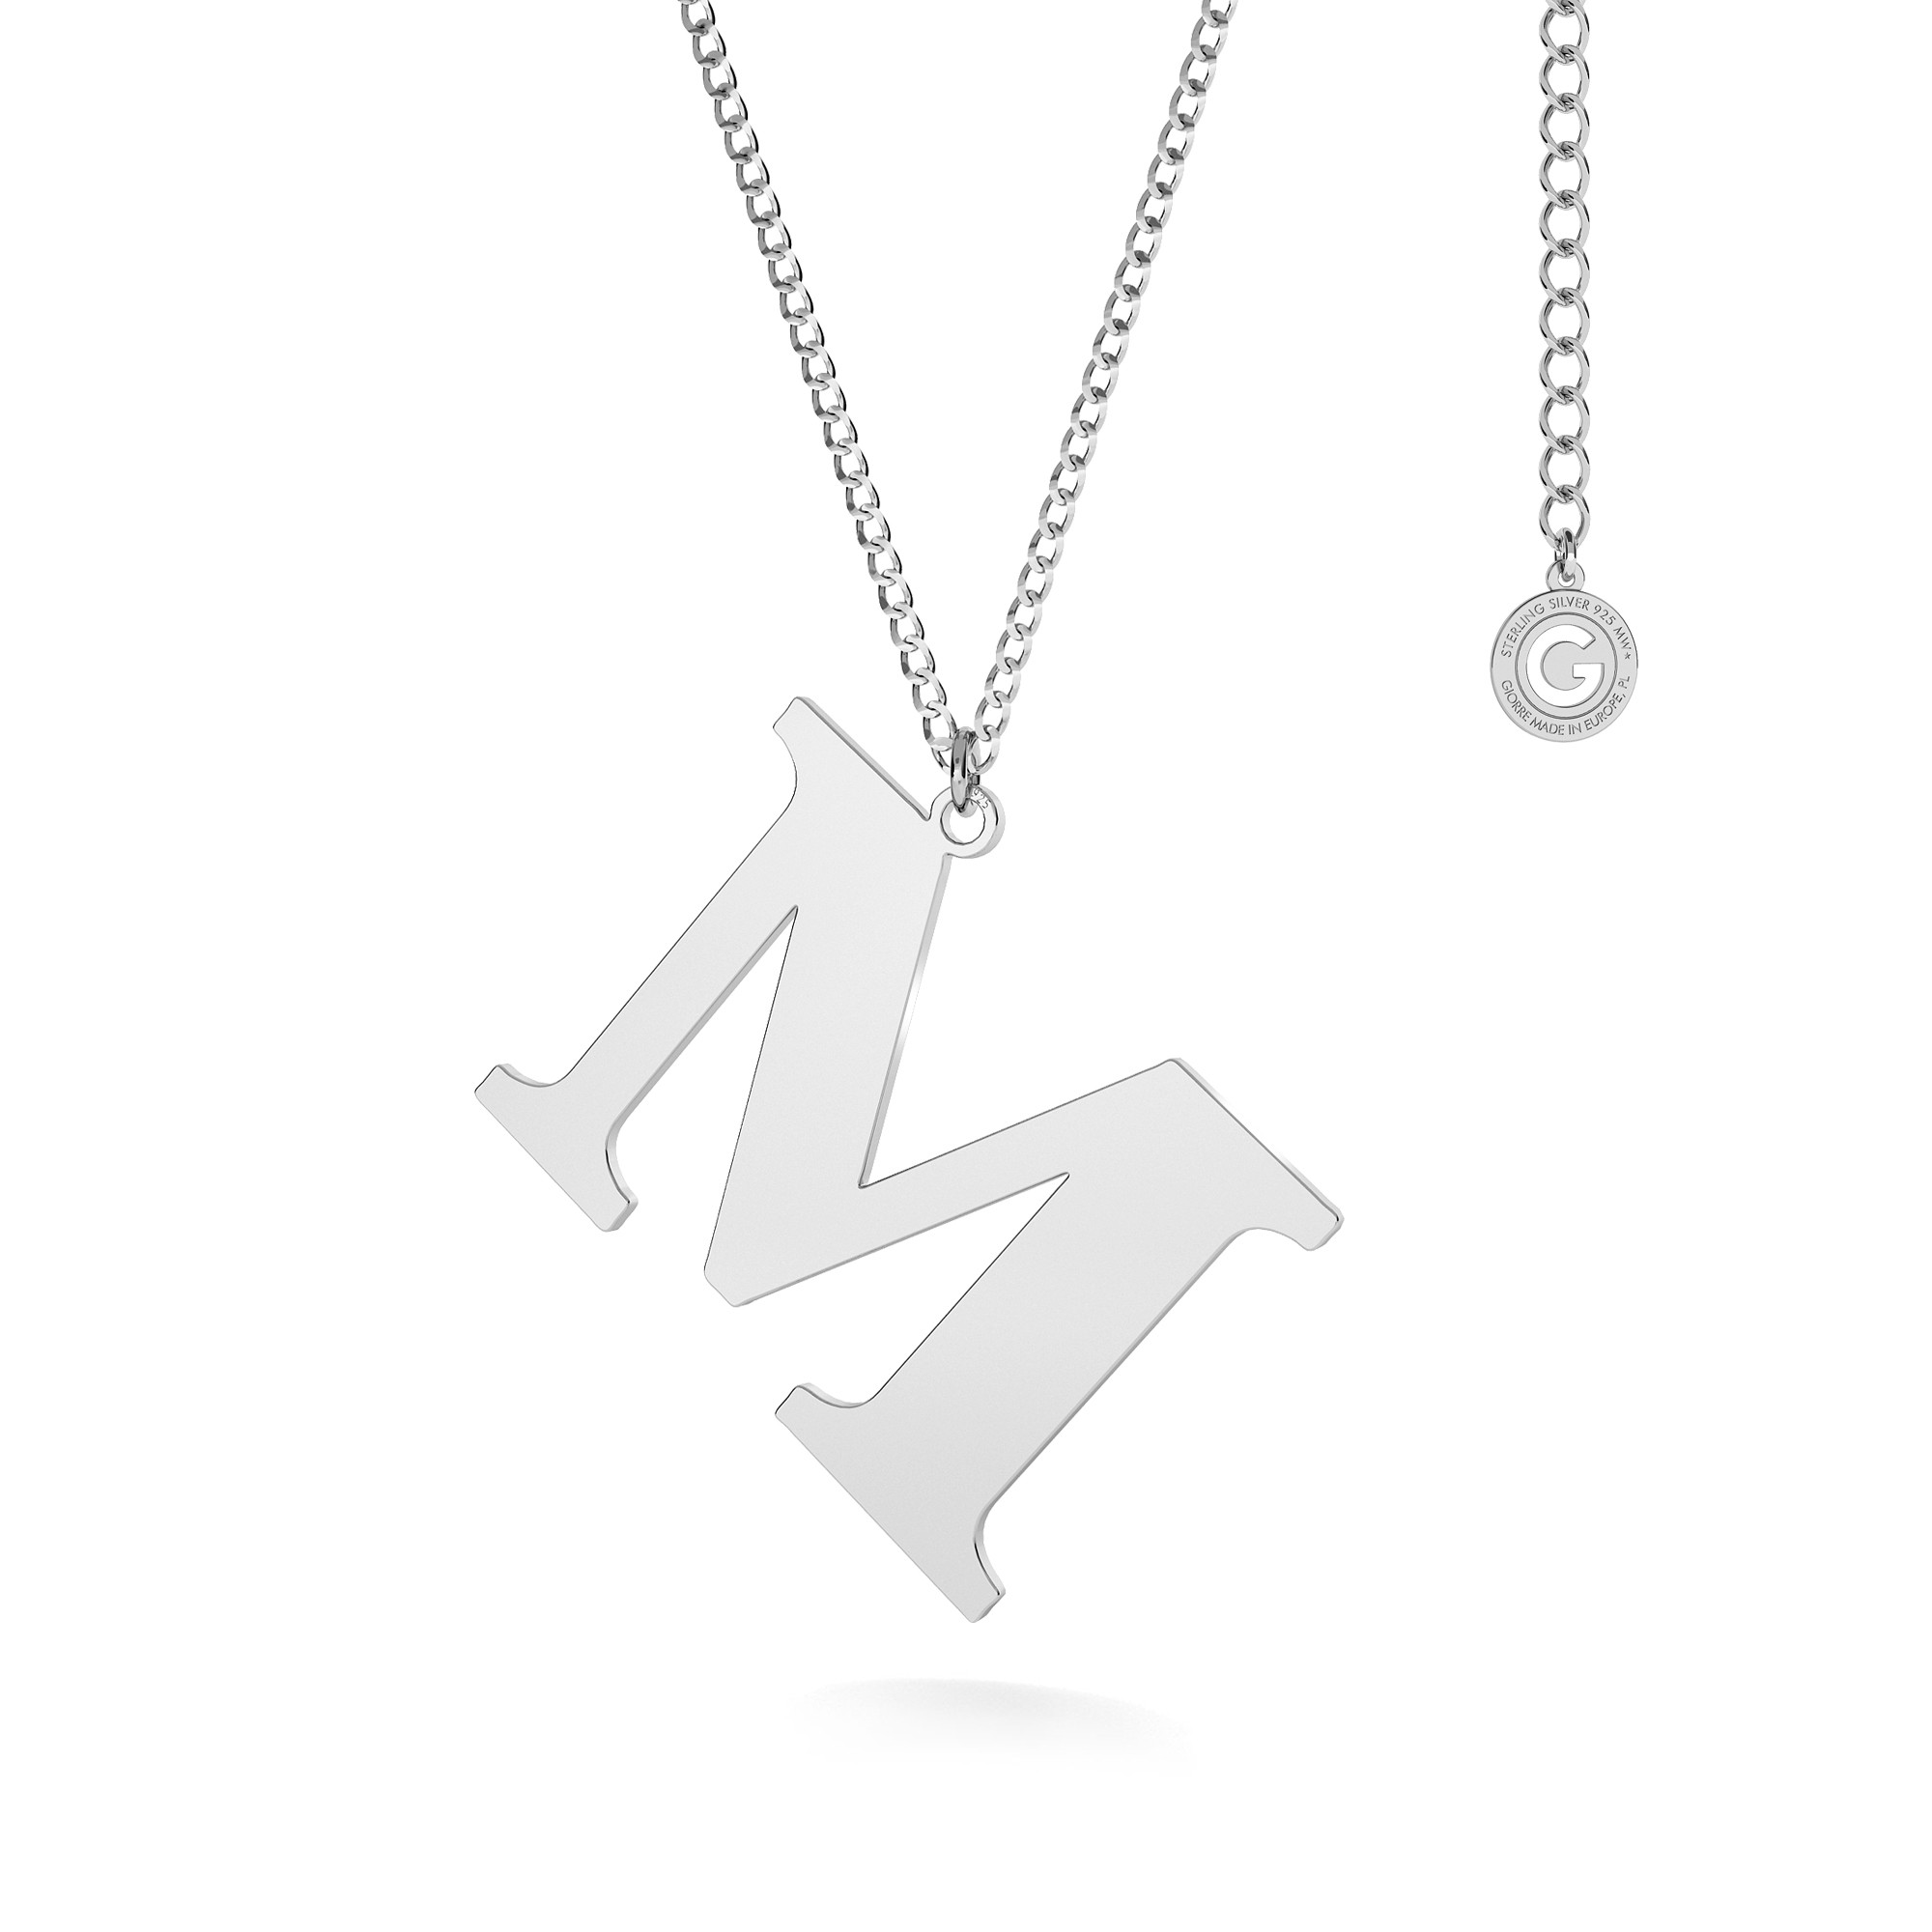 Necklace with big letter A, sterling silver 925